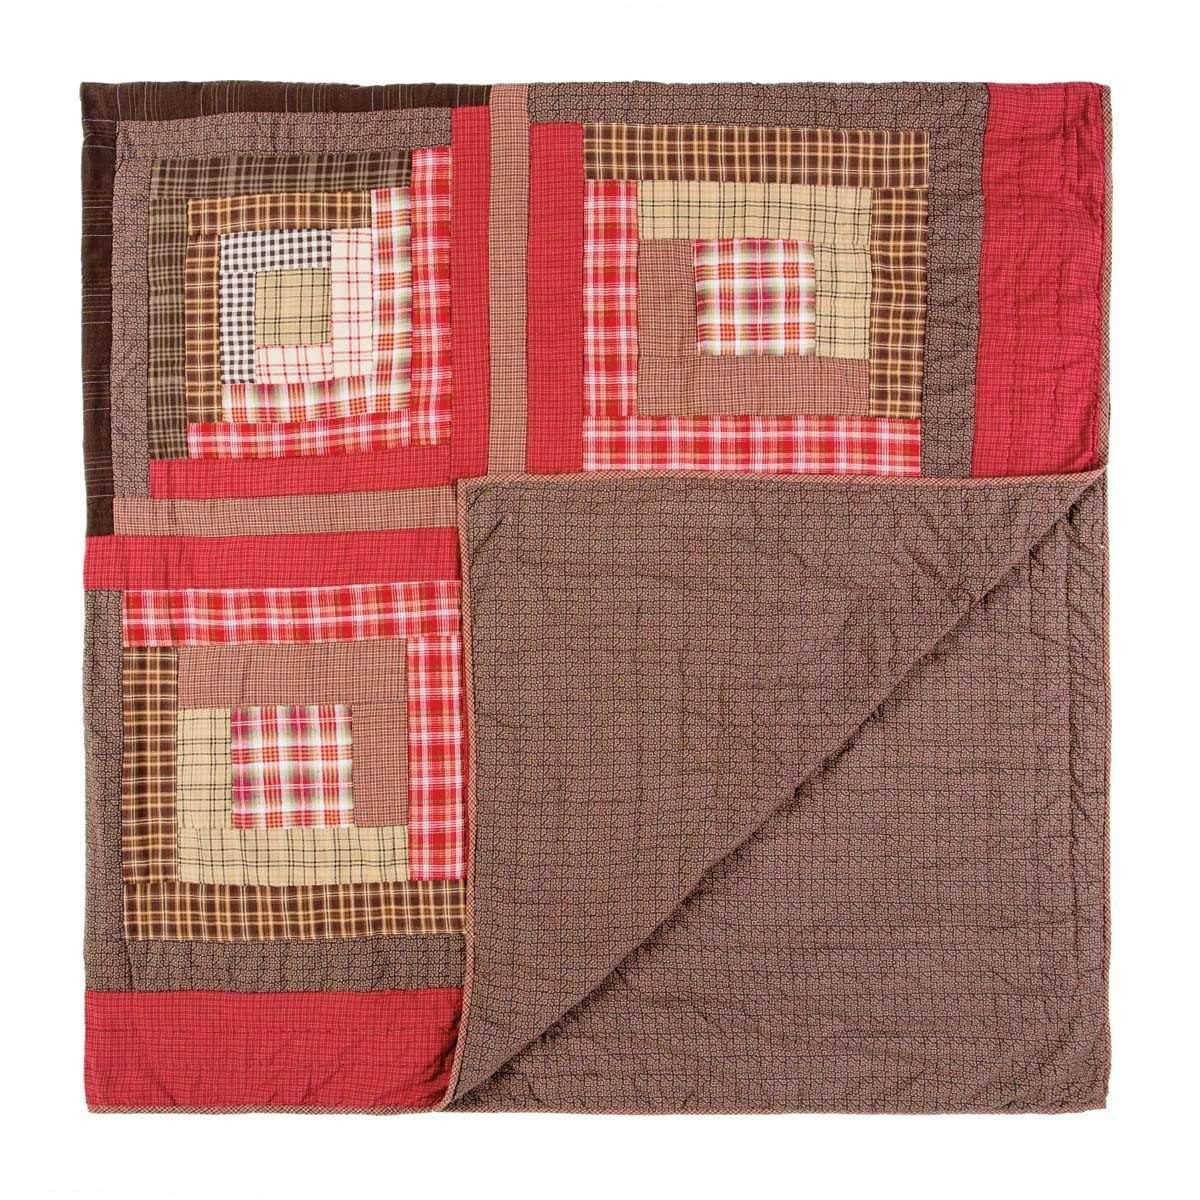 Tacoma Queen Quilt 94Wx94L VHC Brands folded